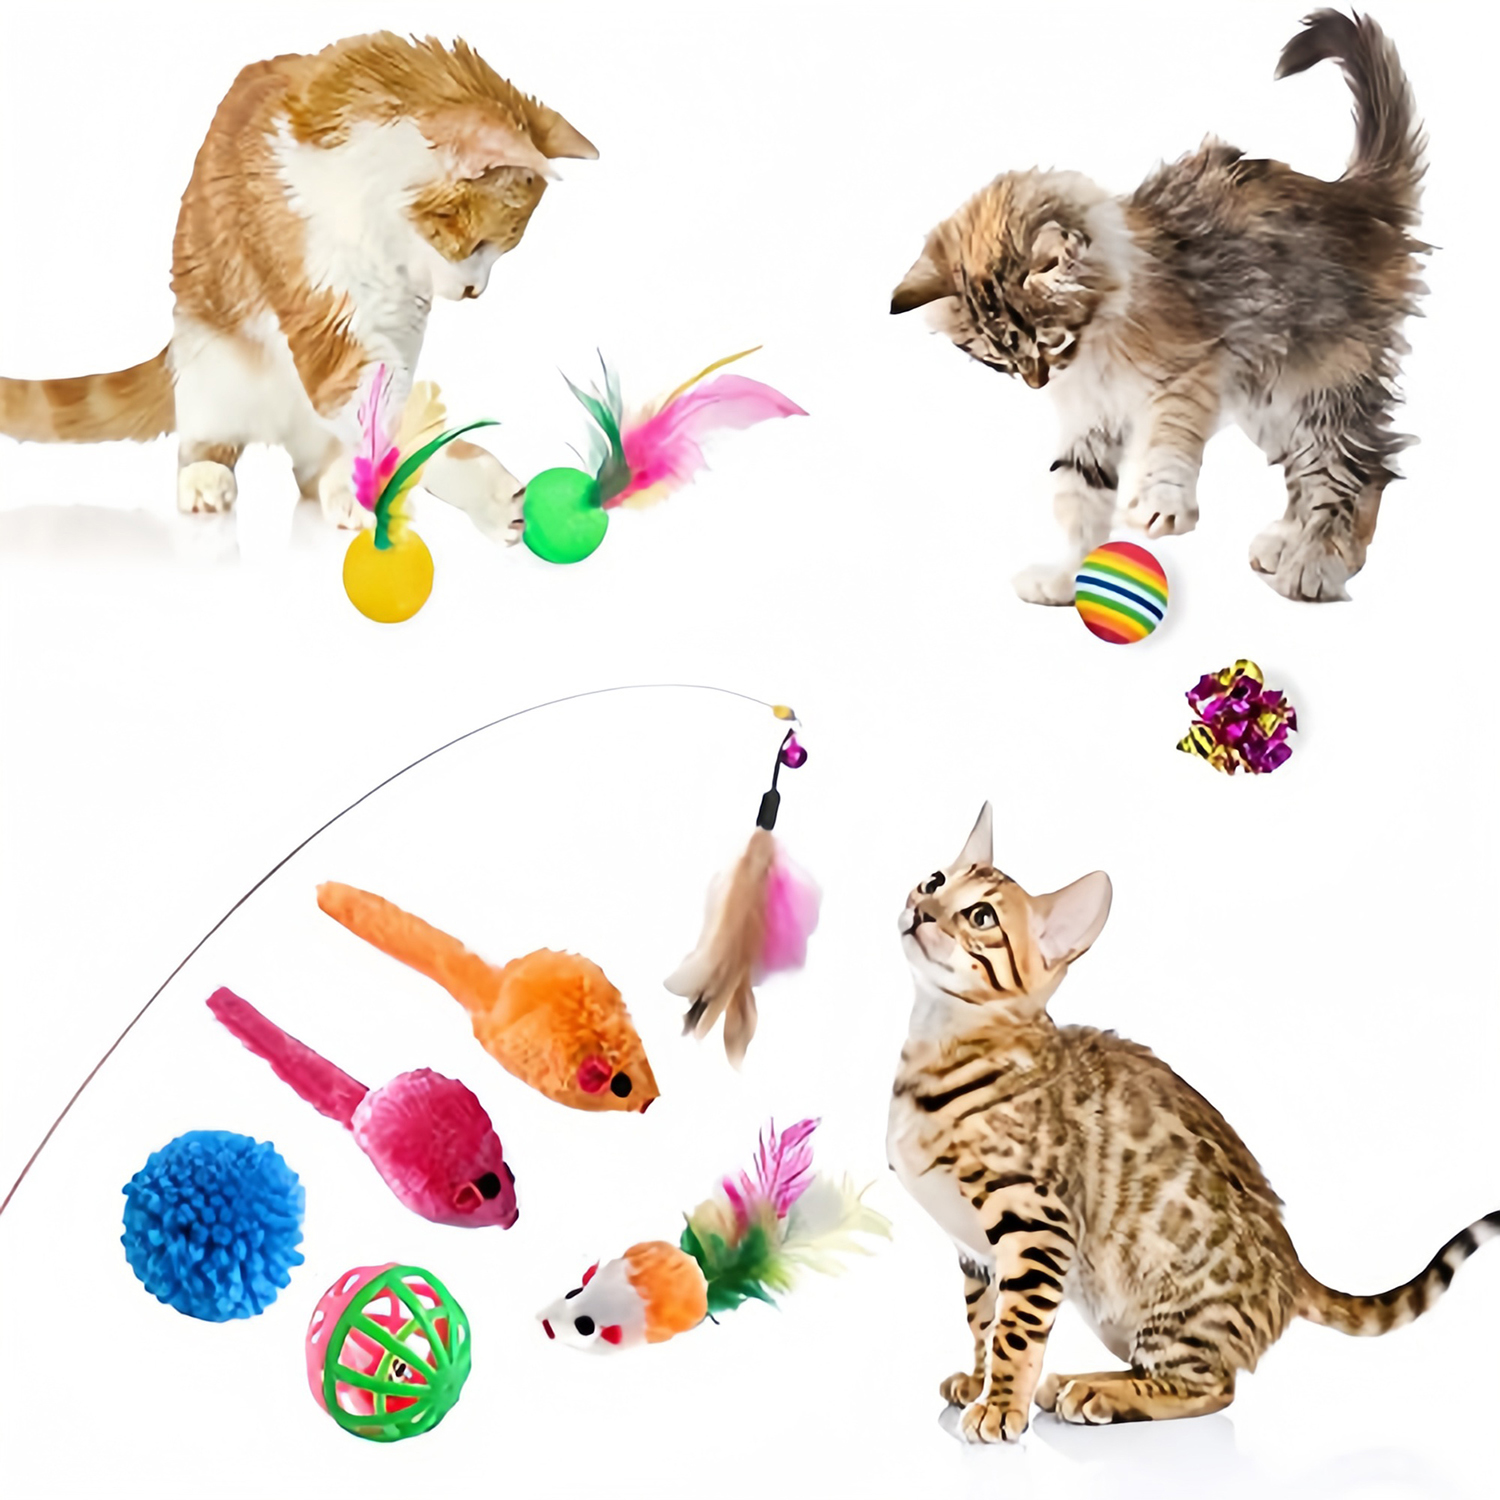 14 PCS Cat Toys for Indoor Cats Kitten Pet Interactive Fun Roller Exerciser Track Toys 3 Level Cat Teaser Ball Toys with 3 Colorful Balls Cat Feather Wand Toys